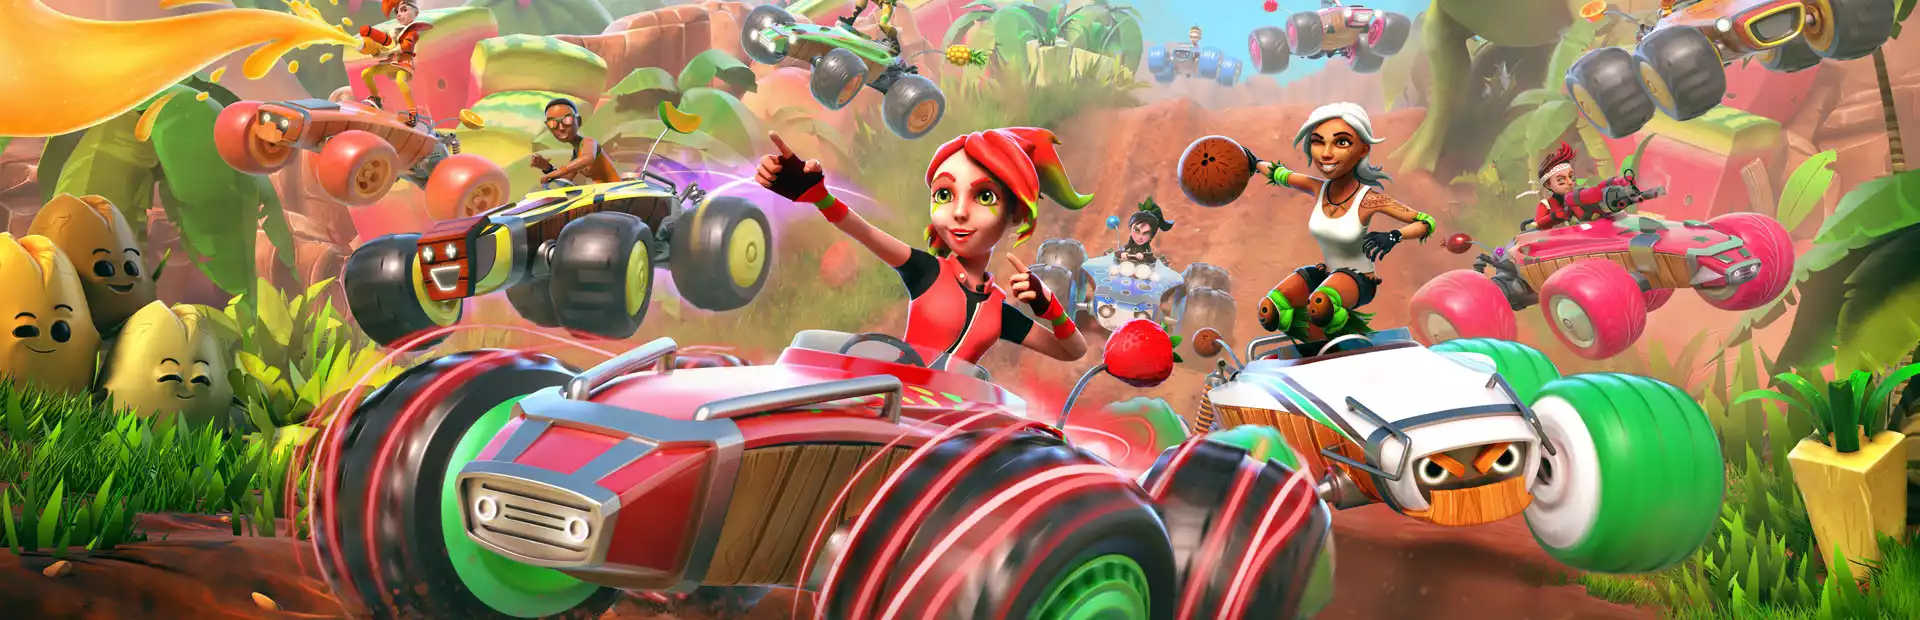 All-Star Fruit Racing Steam Key China